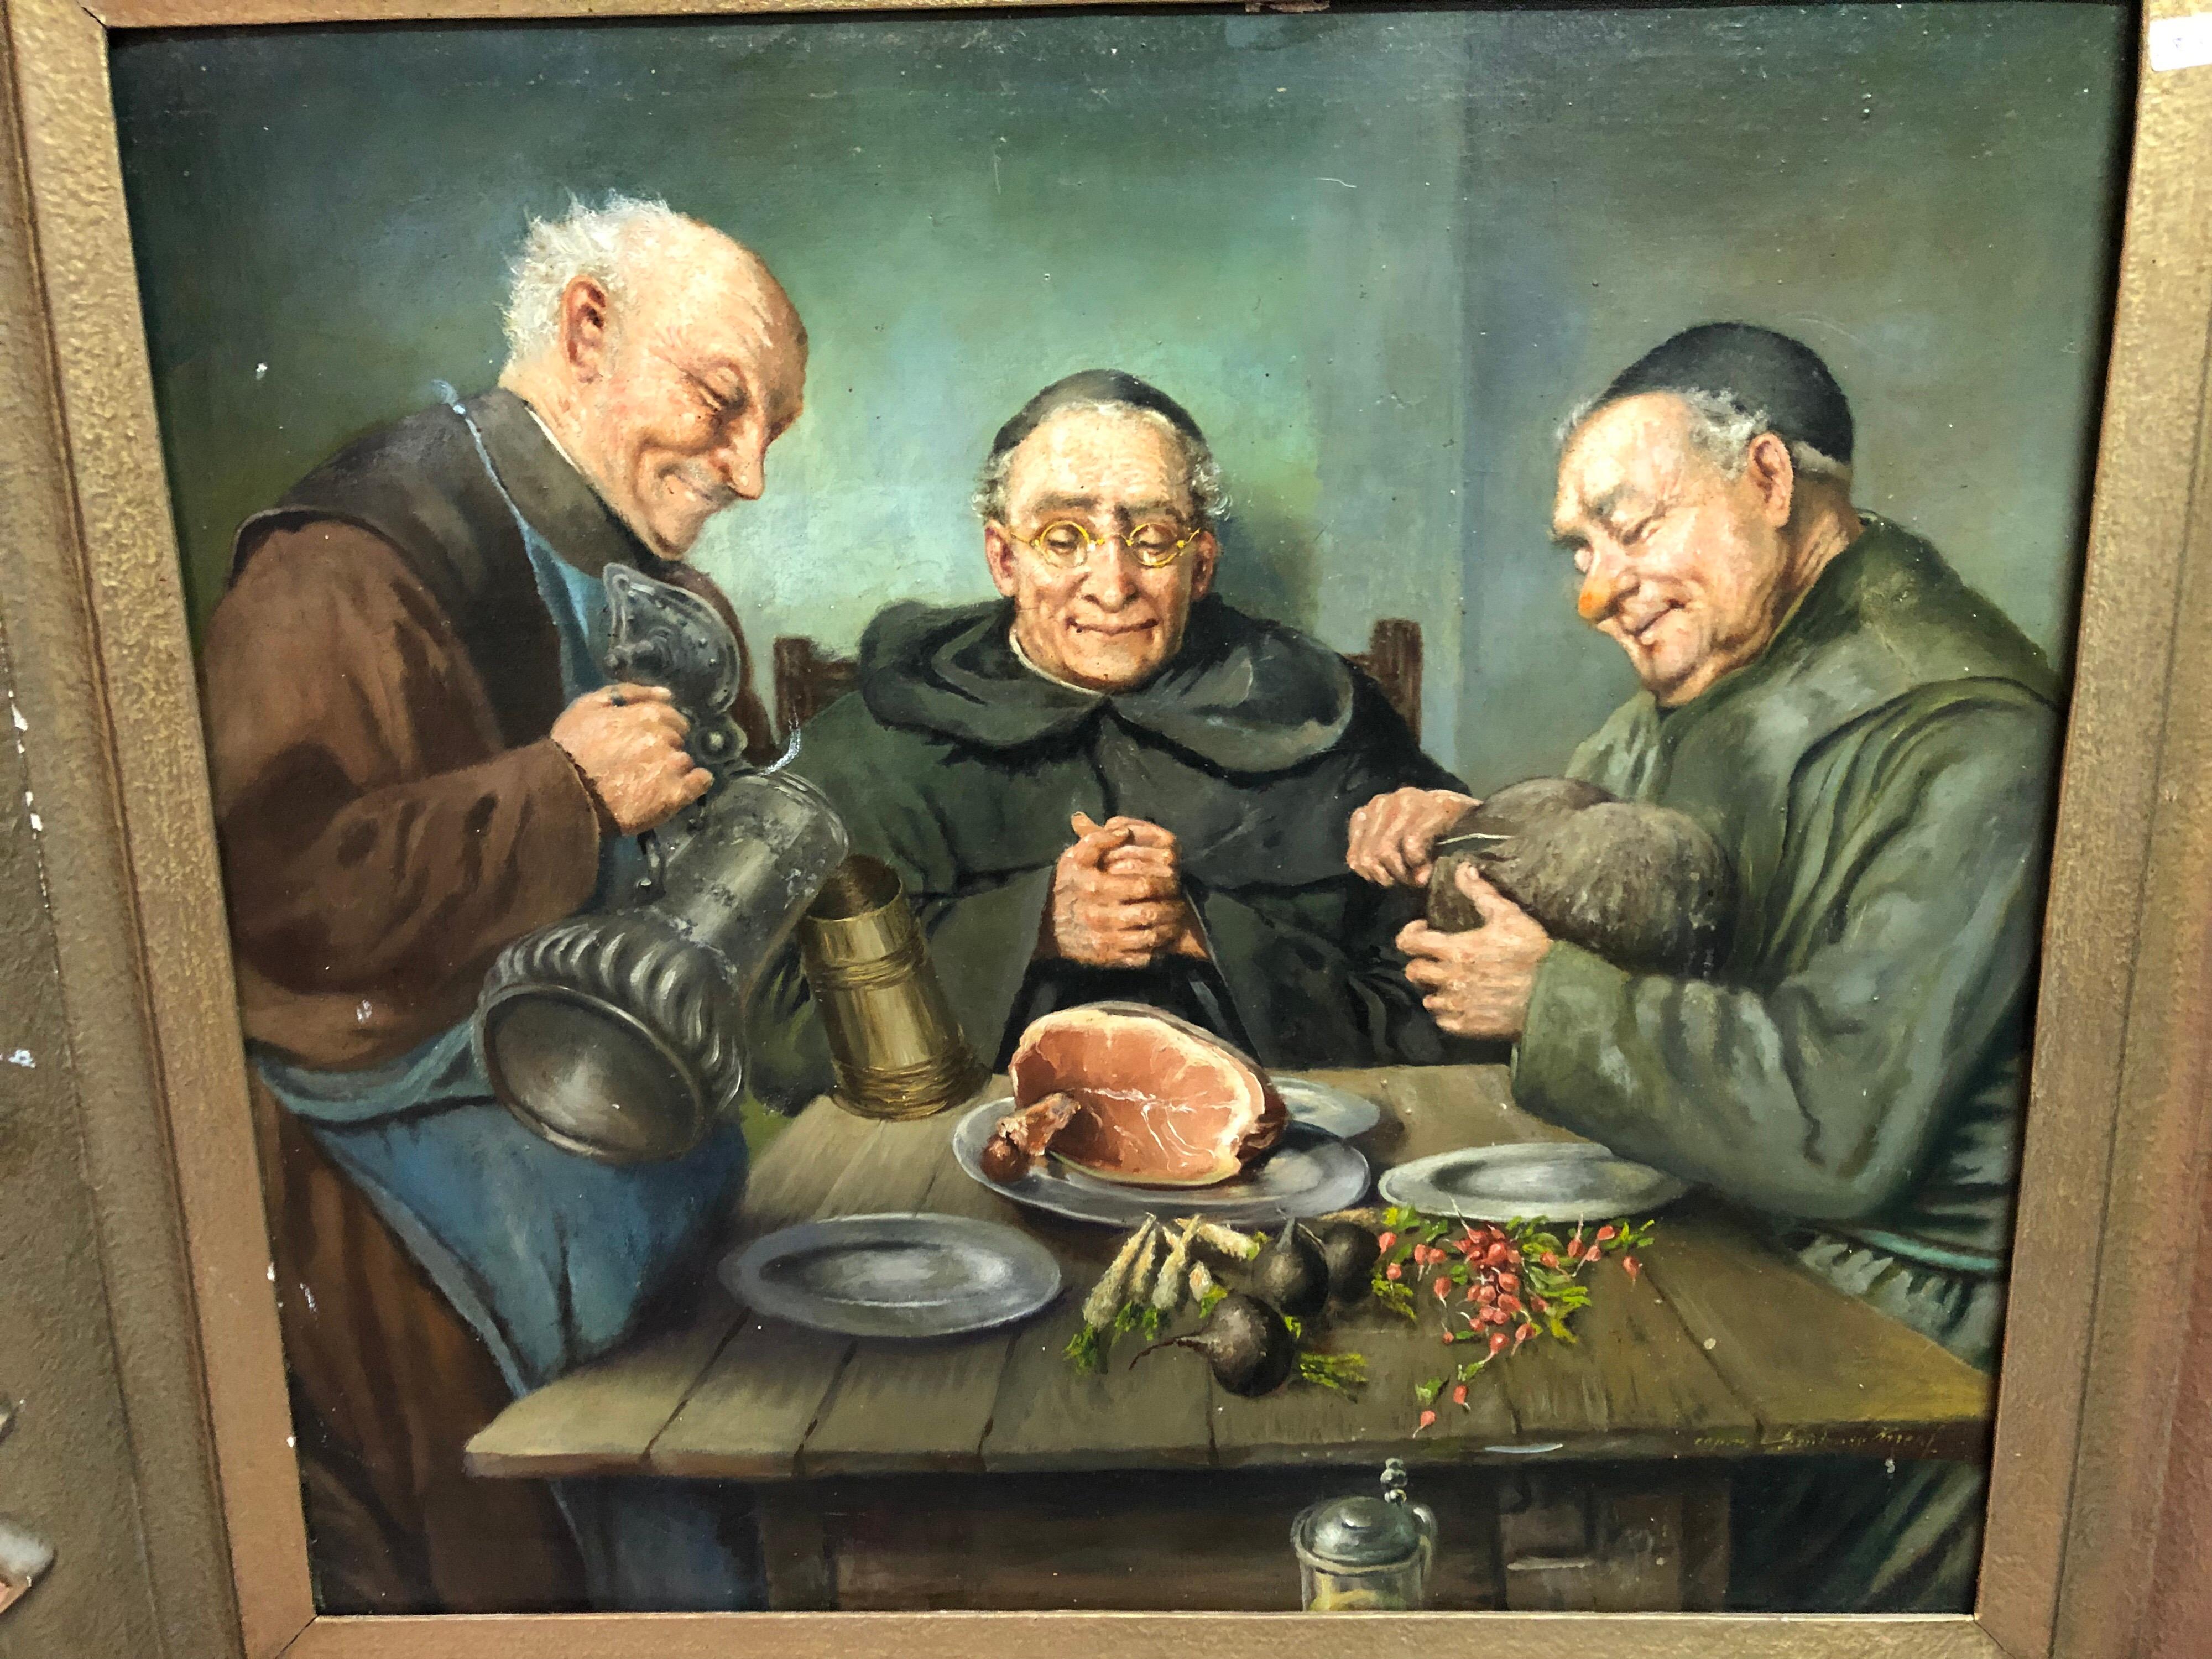 20th century oil painting of dining monks in the wine cellar monastery.
3 monks sitting at the table and dining. Oil on canvas. Hand painted.
Measures: H 67
B 72
T 7.